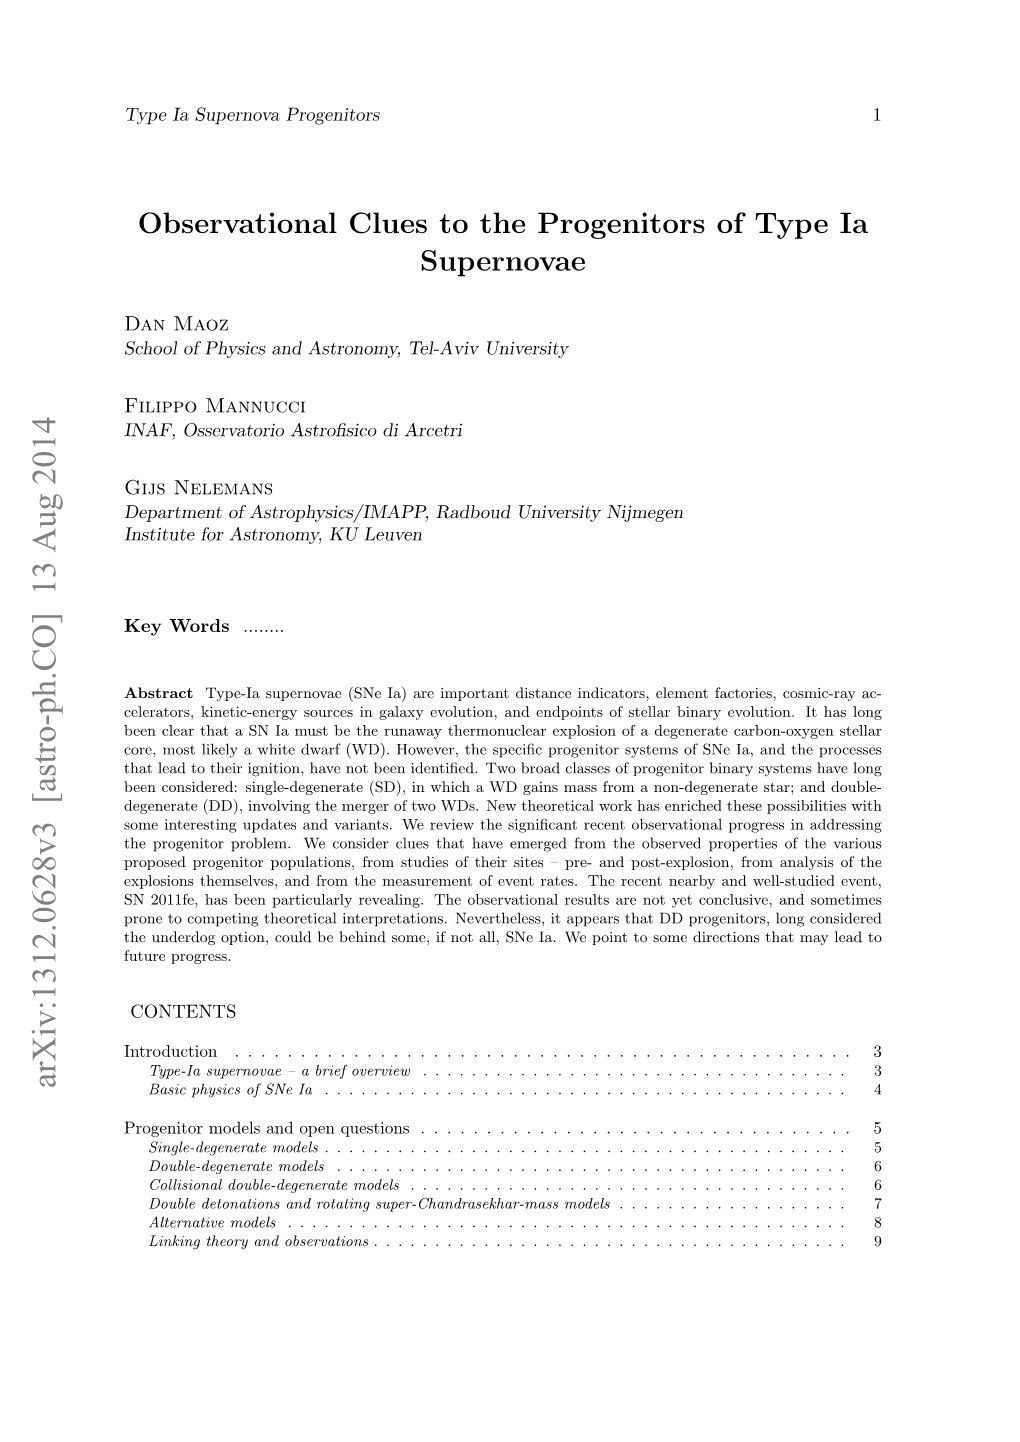 Observational Clues to the Progenitors of Type Ia Supernovae